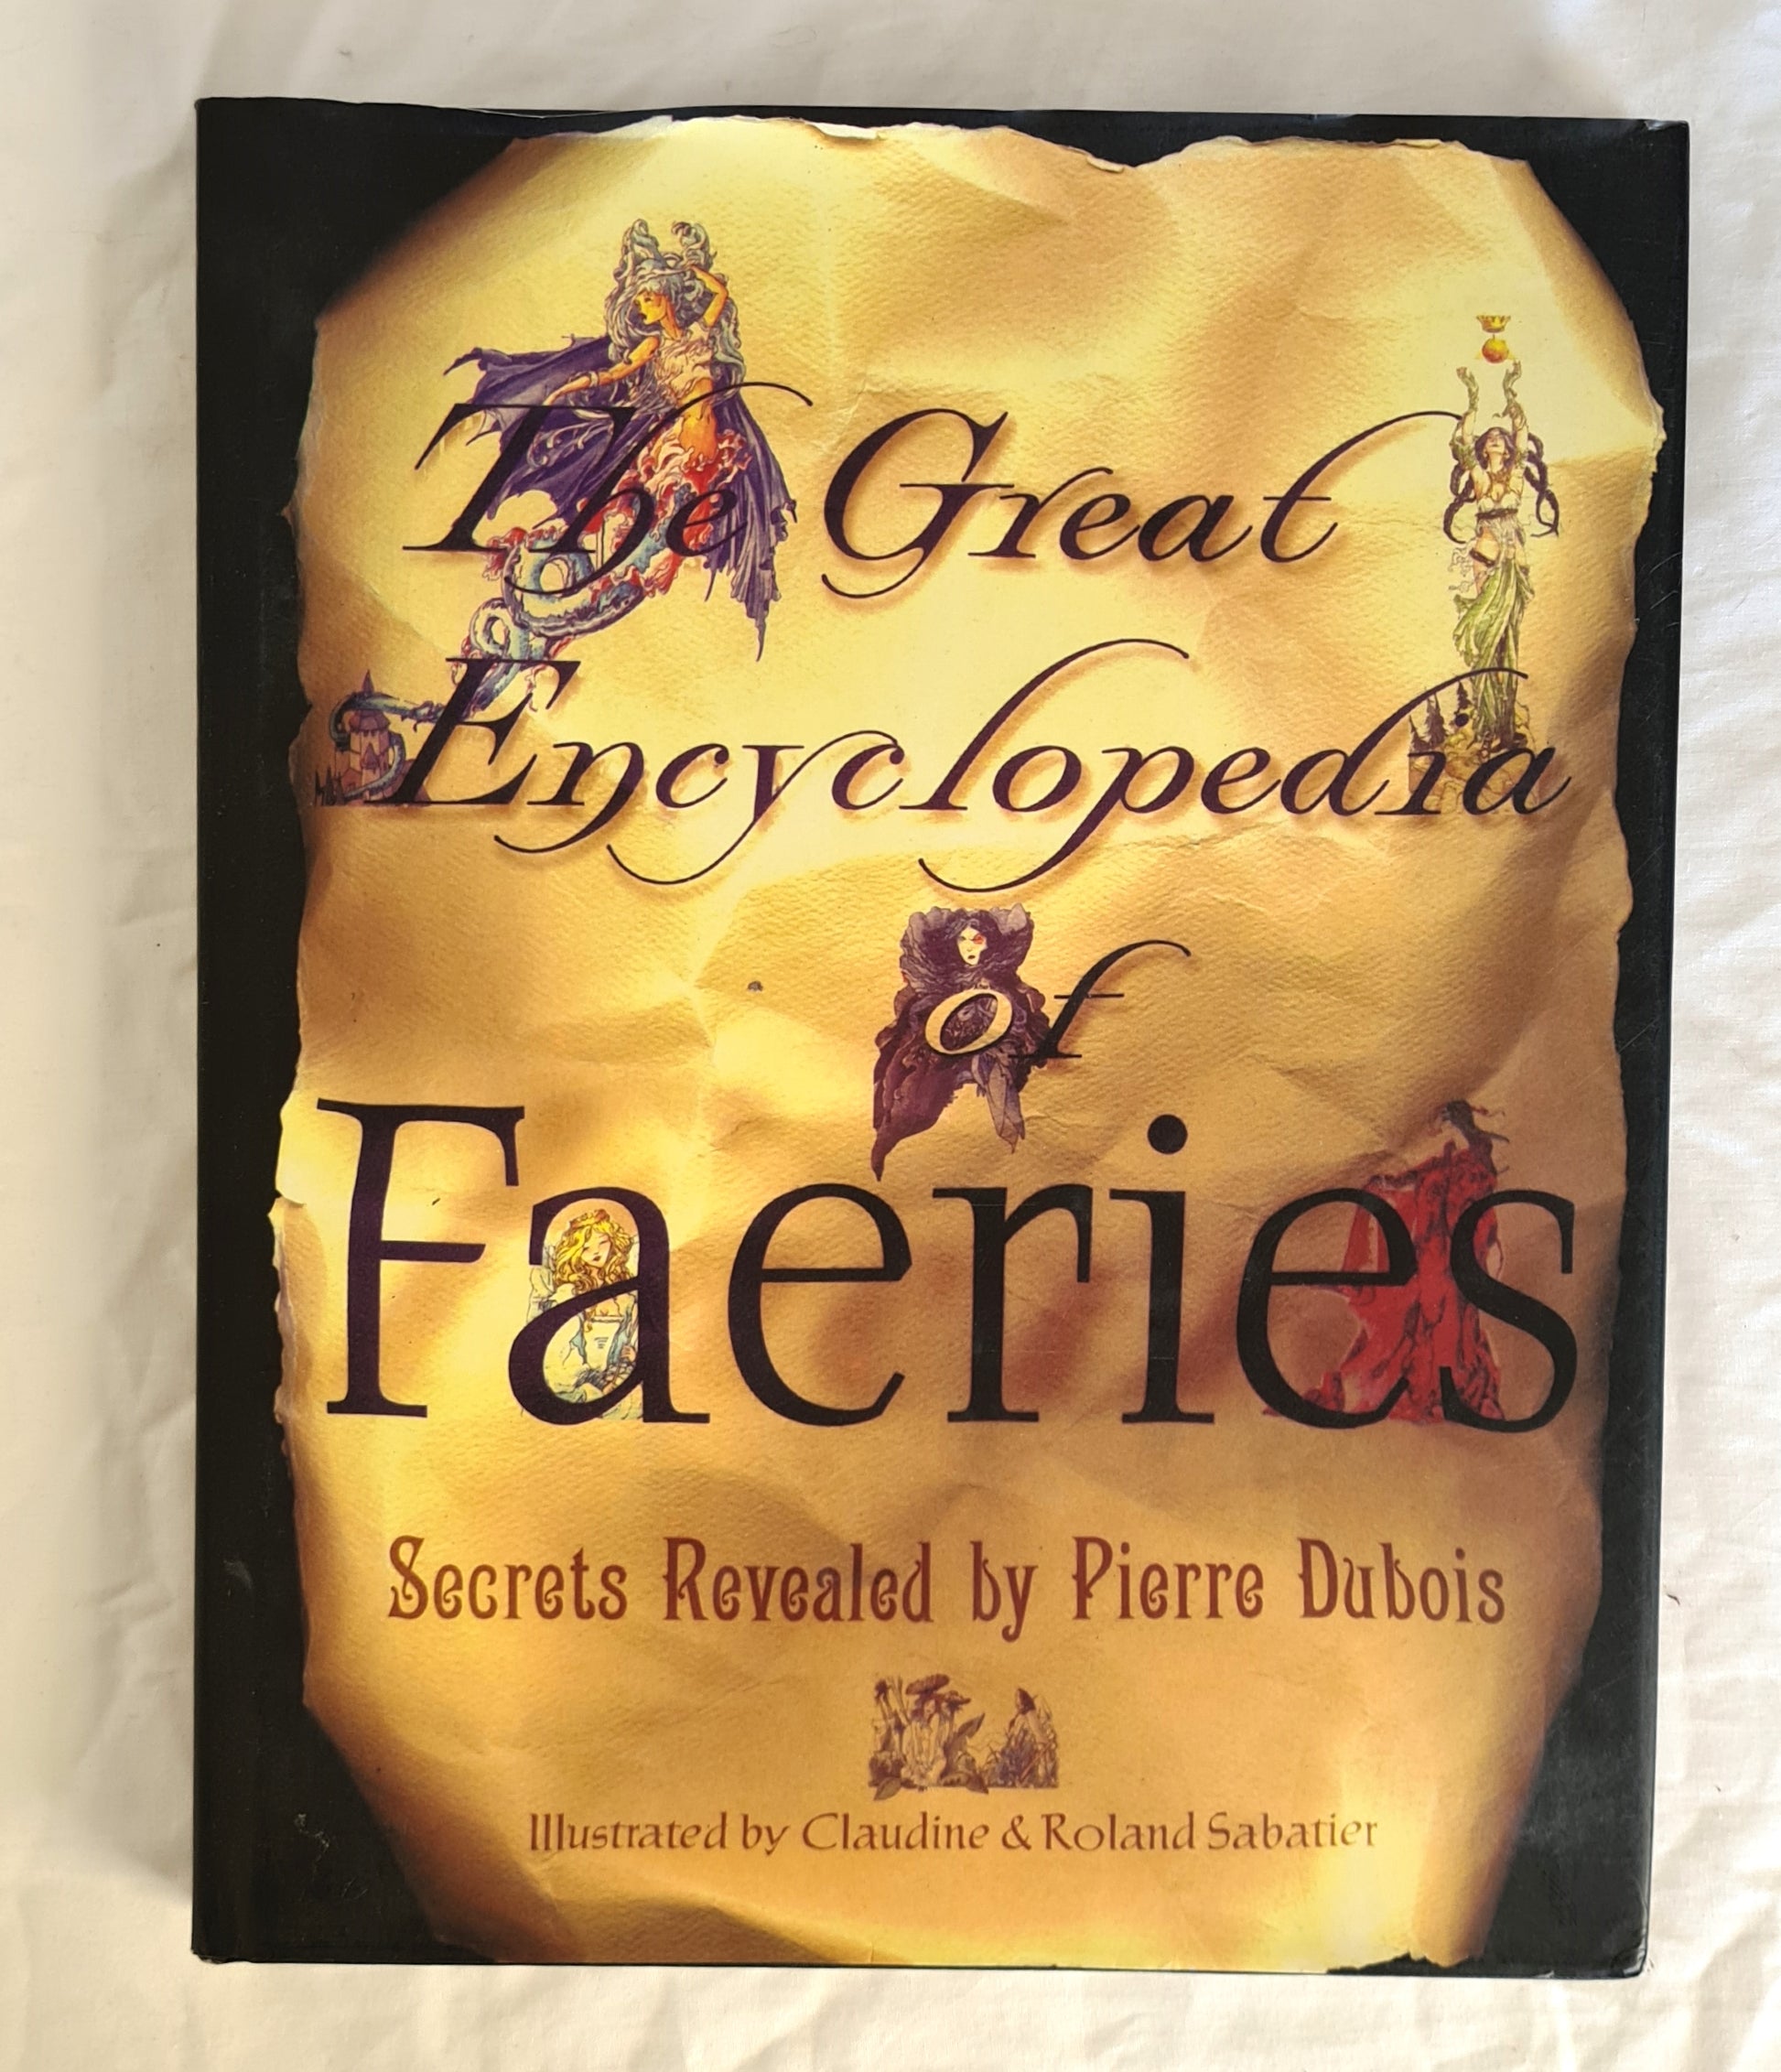 The Great Encyclopedia of Faeries  by Pierre Dubois  Illustrated by Claudine & Roland Sabatier